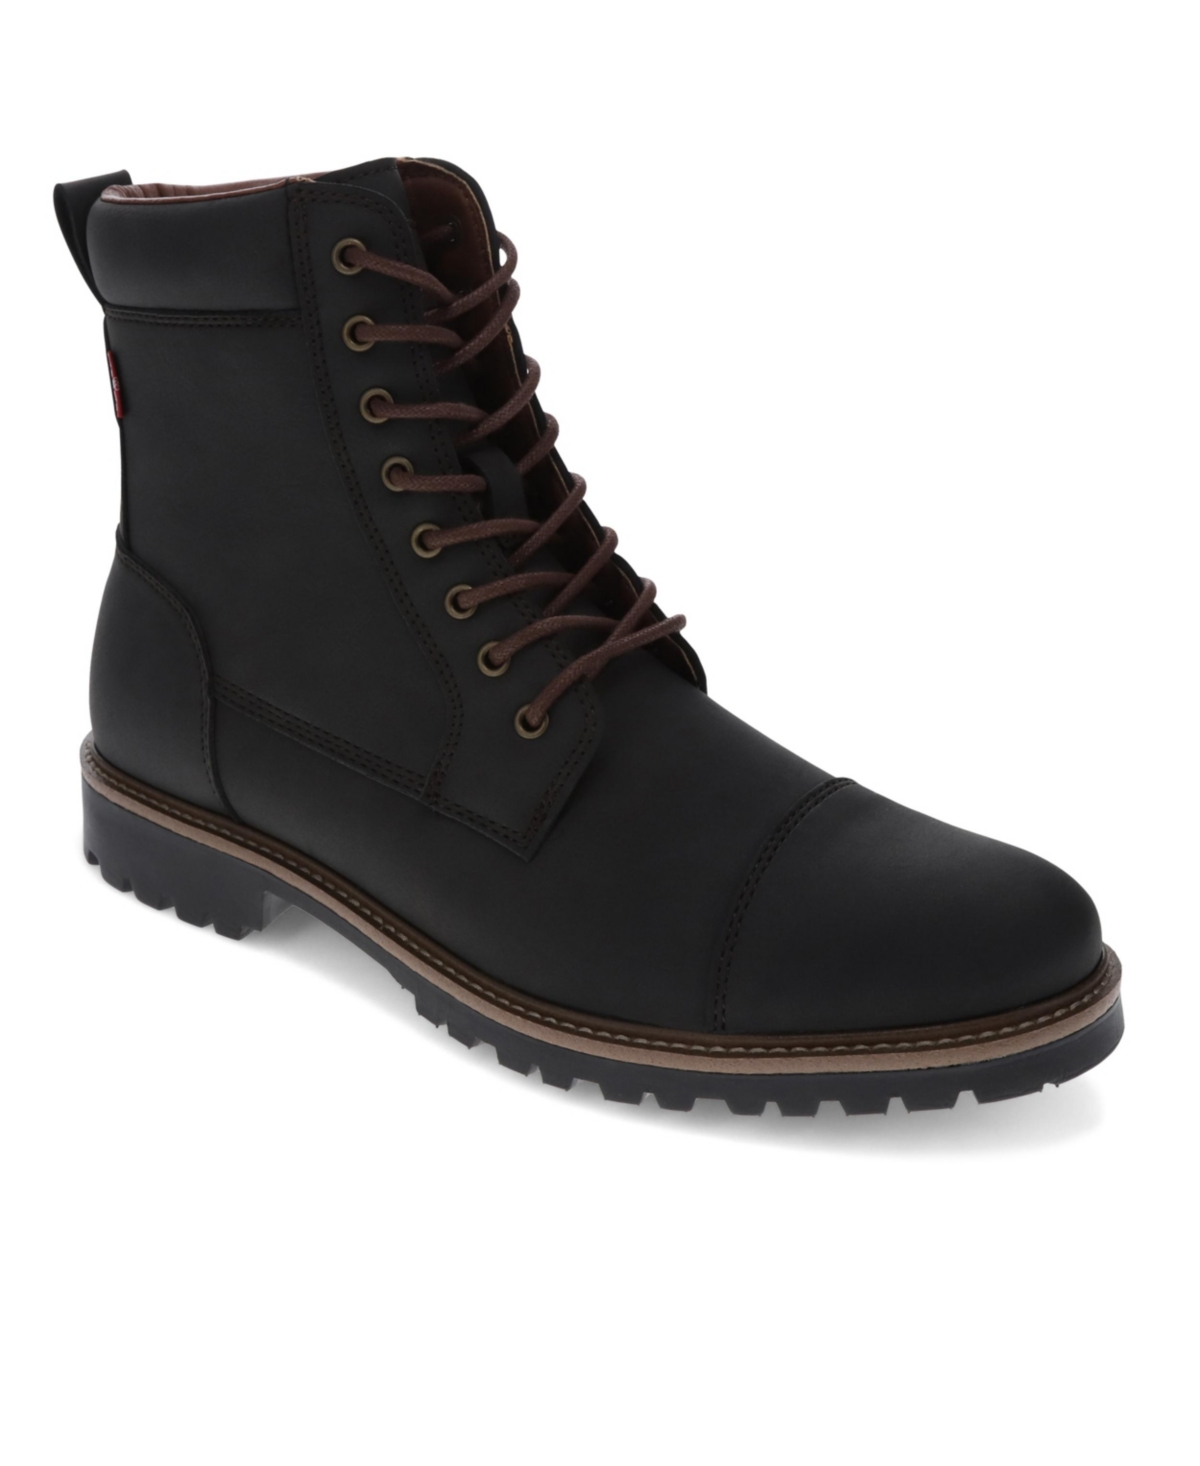 Men's Wyatt Faux Leather Lace-Up Boots - Dark Brown